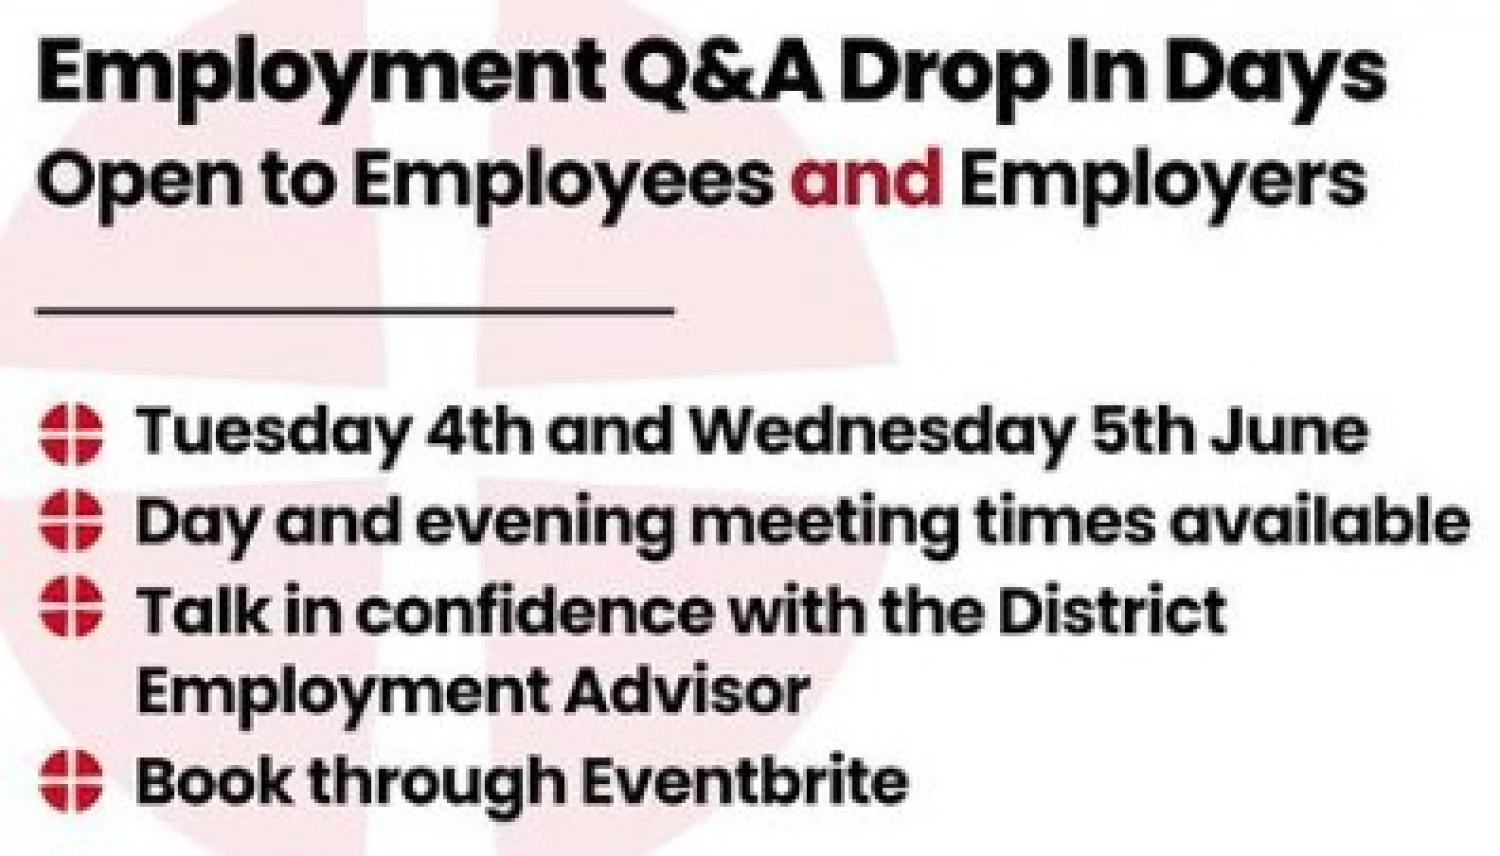 q and a employment